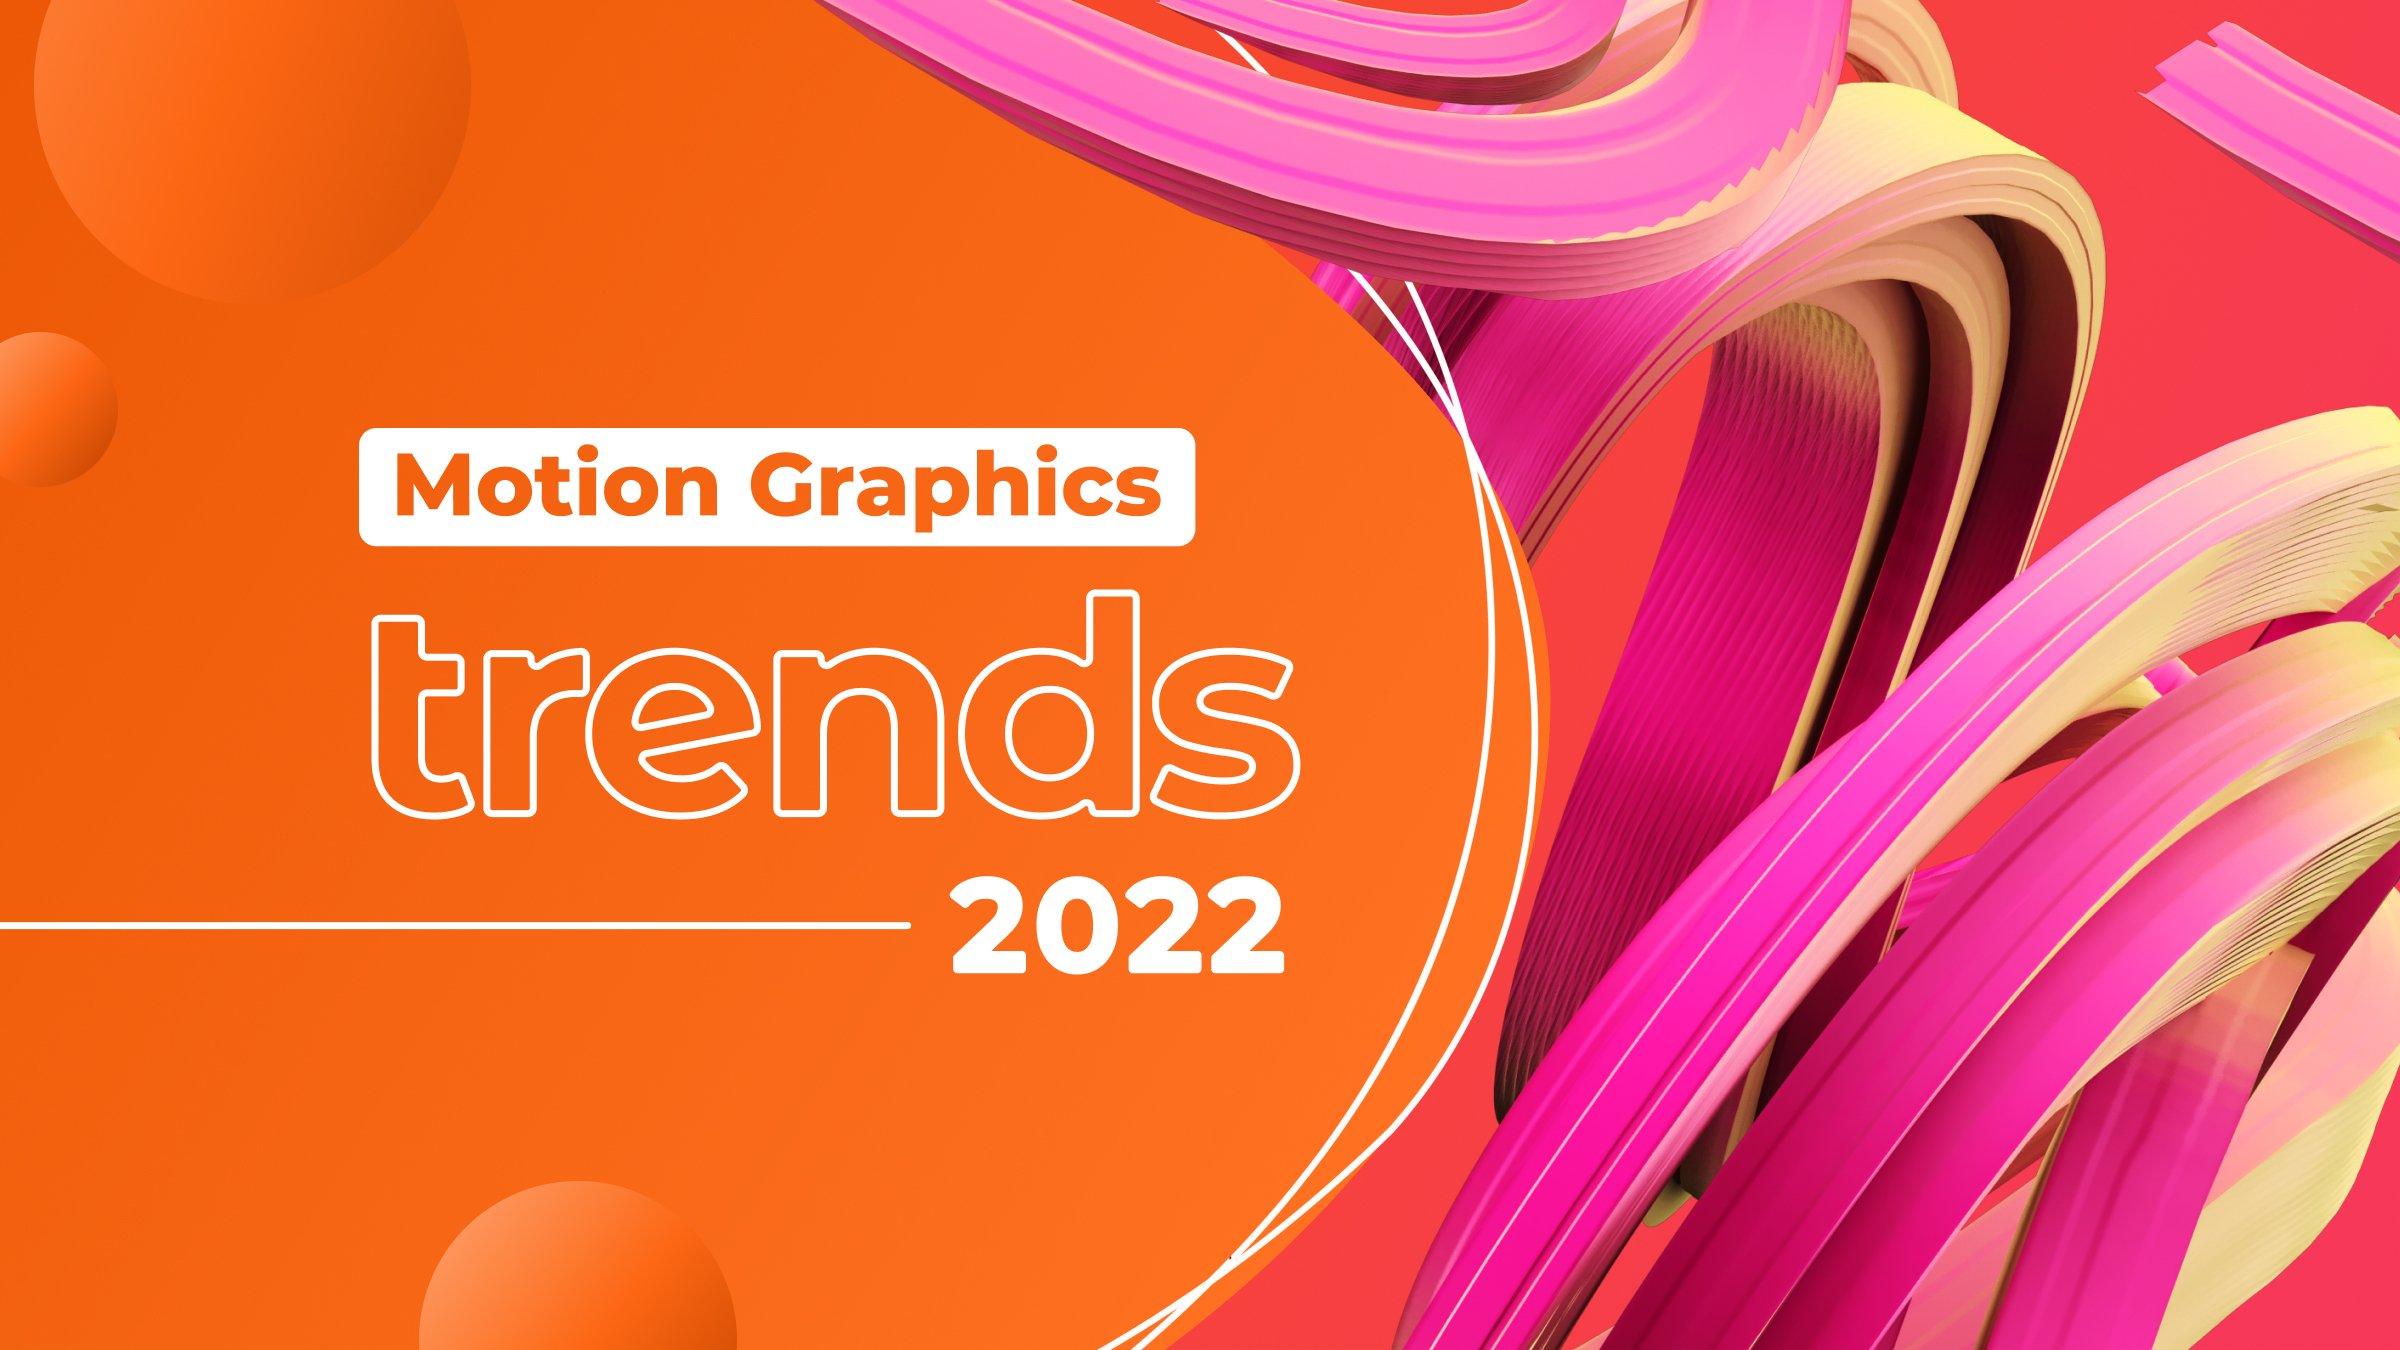 Motion Graphics Trends 2022